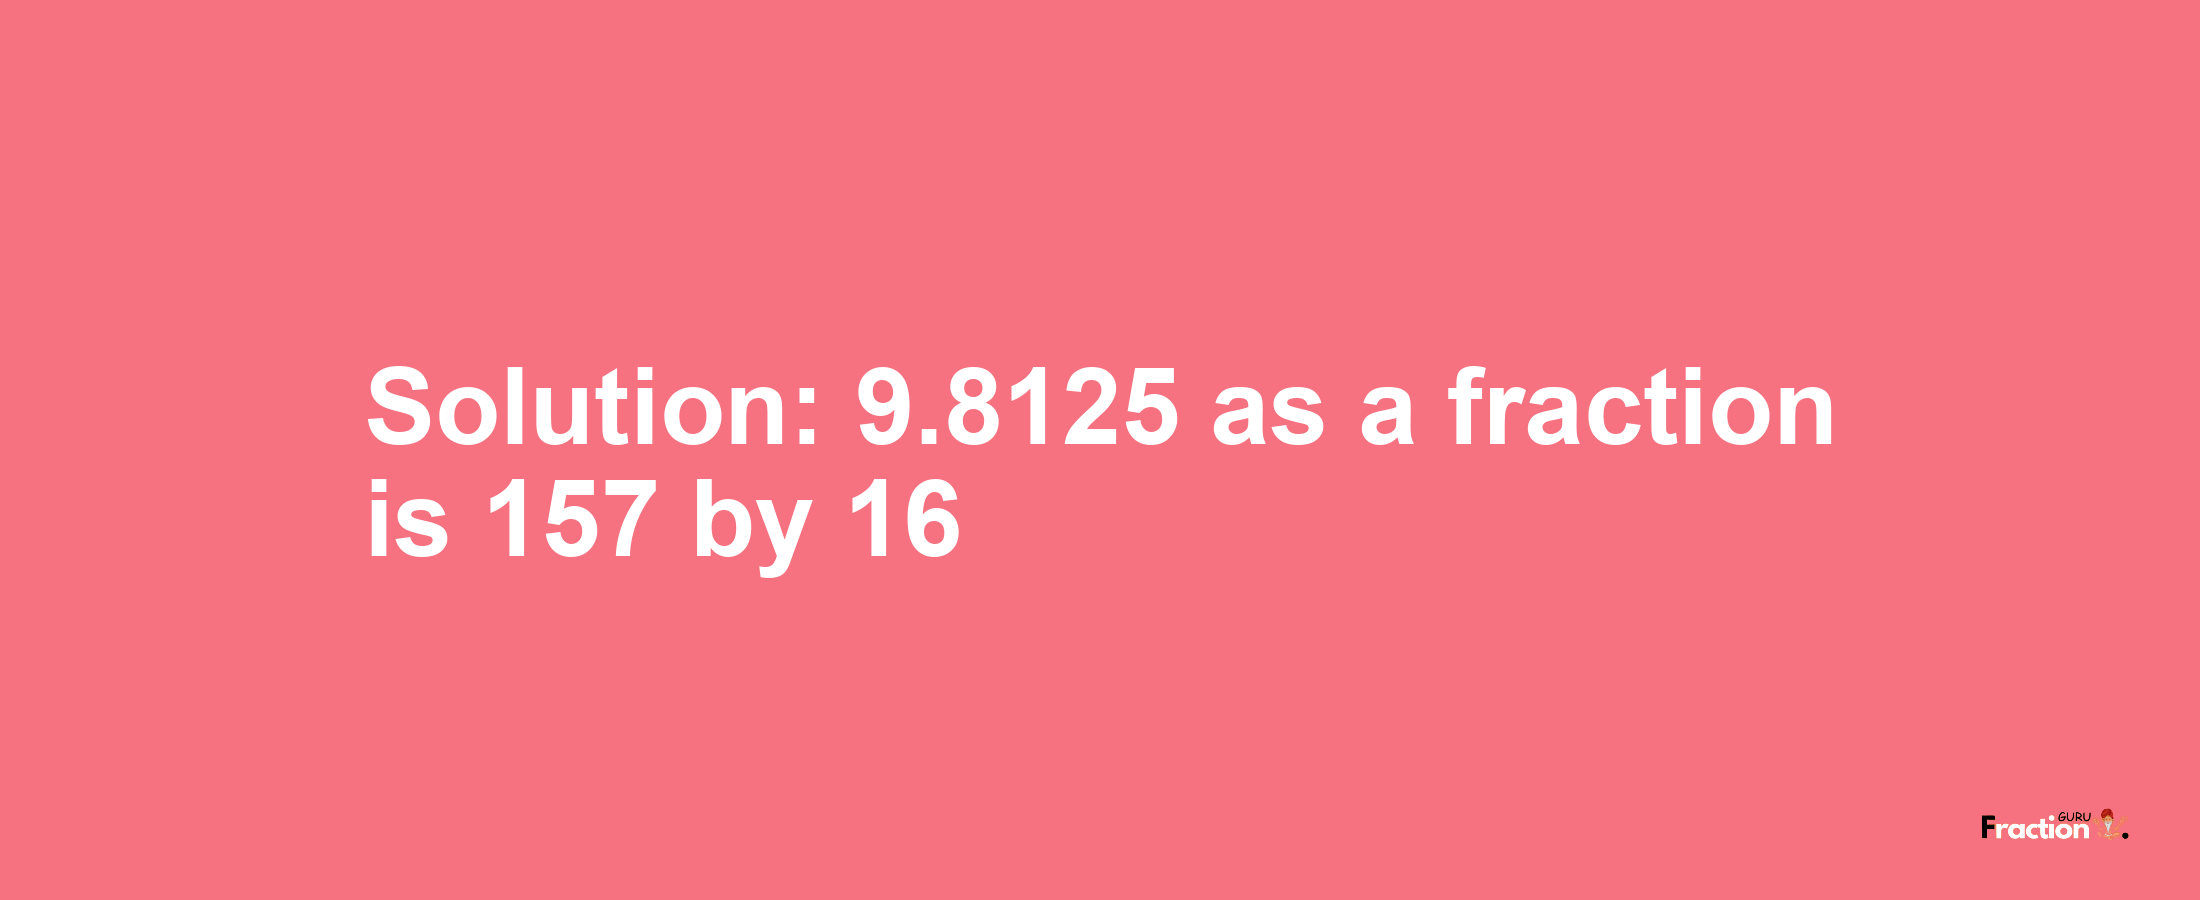 Solution:9.8125 as a fraction is 157/16